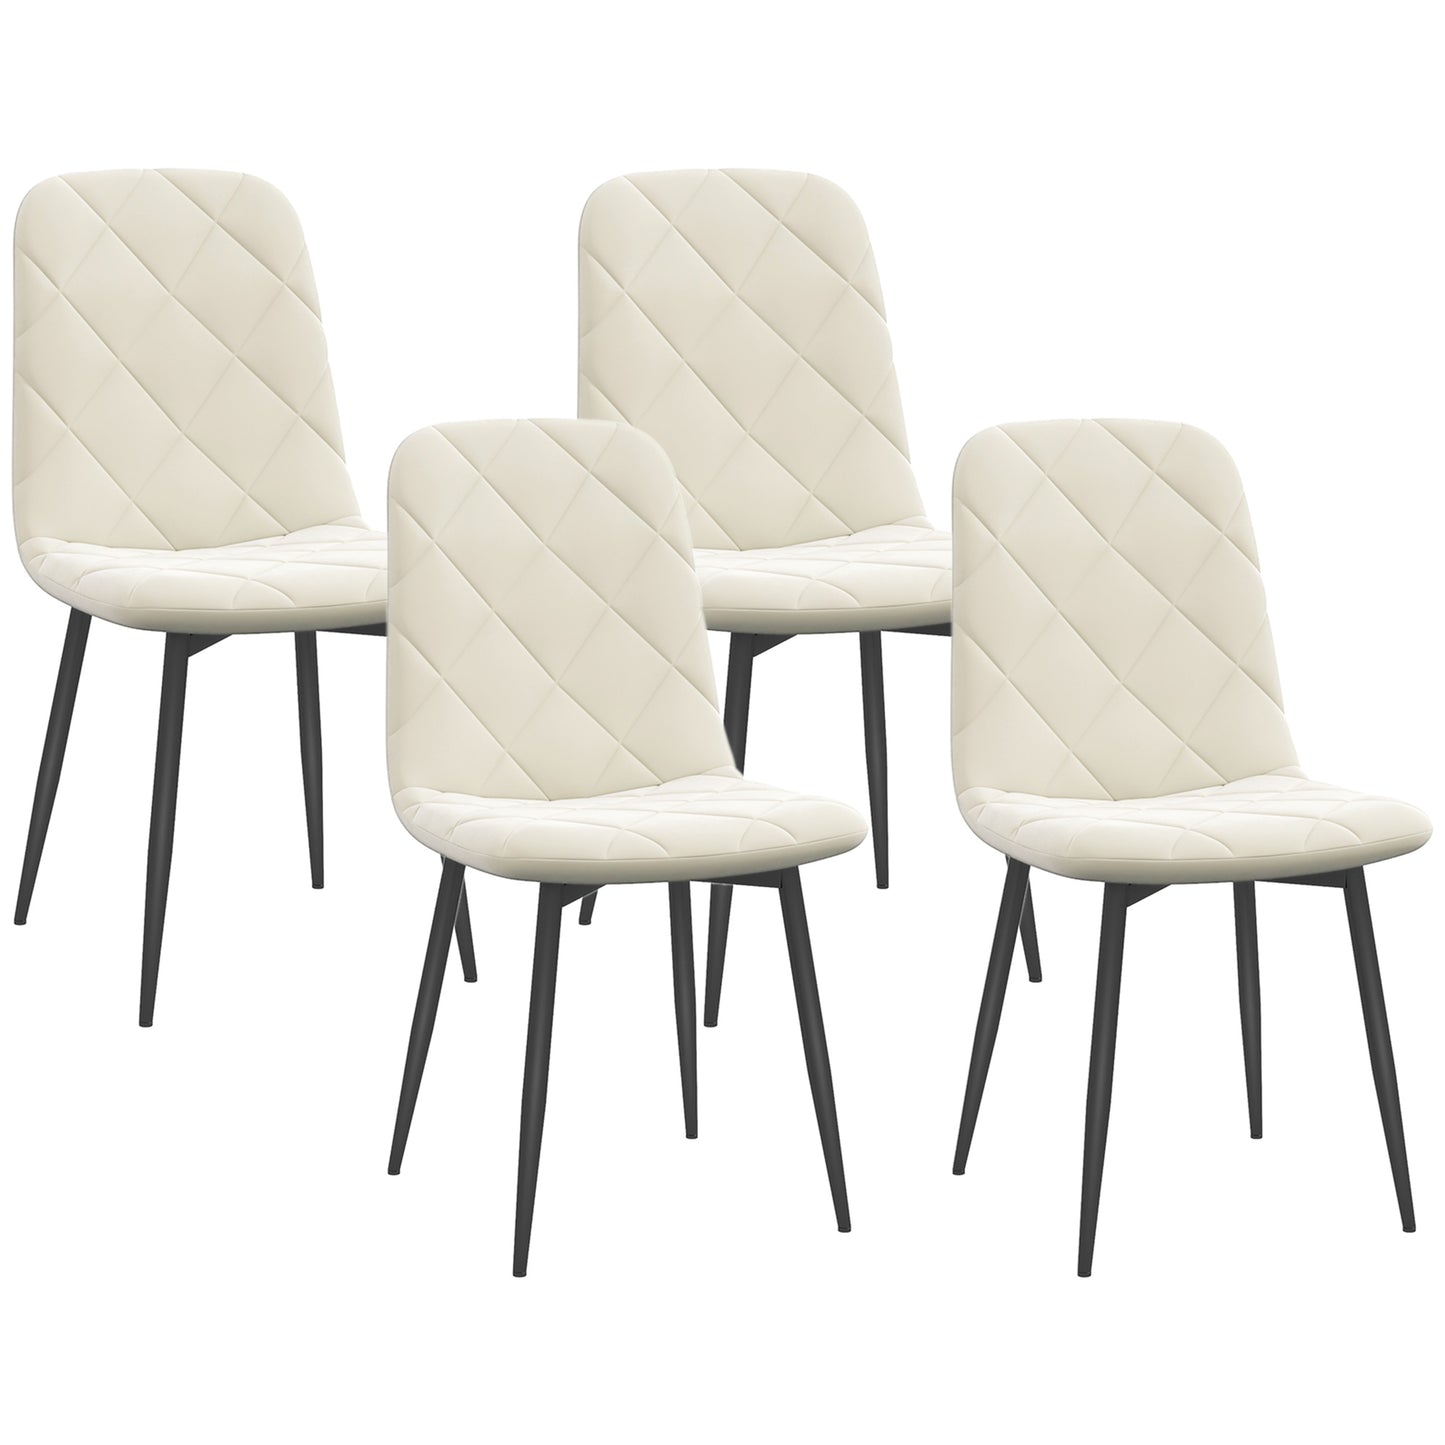 Dining Chairs Set of 4, Upholstered with Steel Legs, in Cream